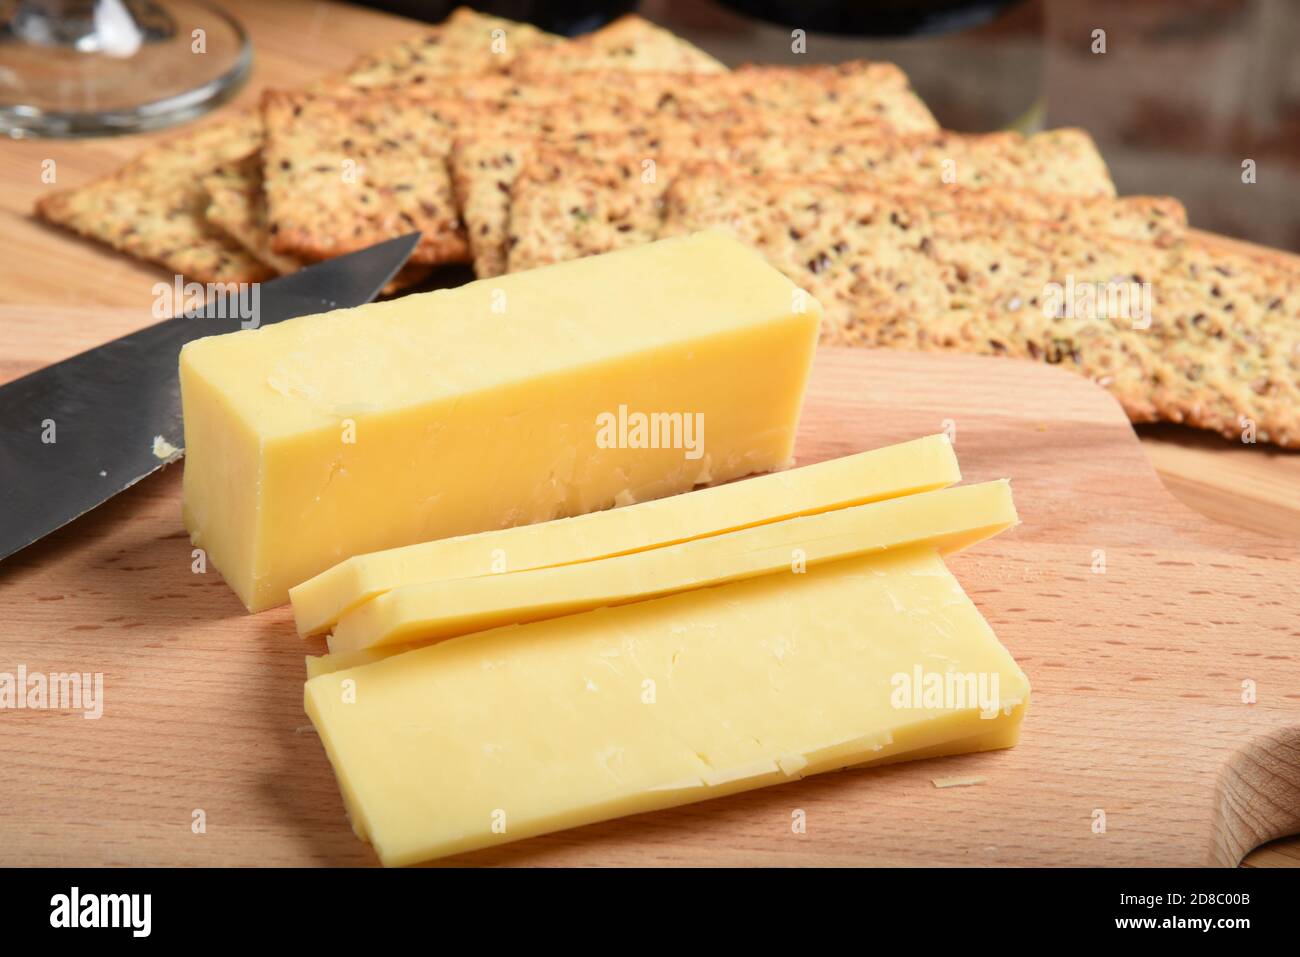 Sliced white cheddar cheese on a cutting board Stock Photo